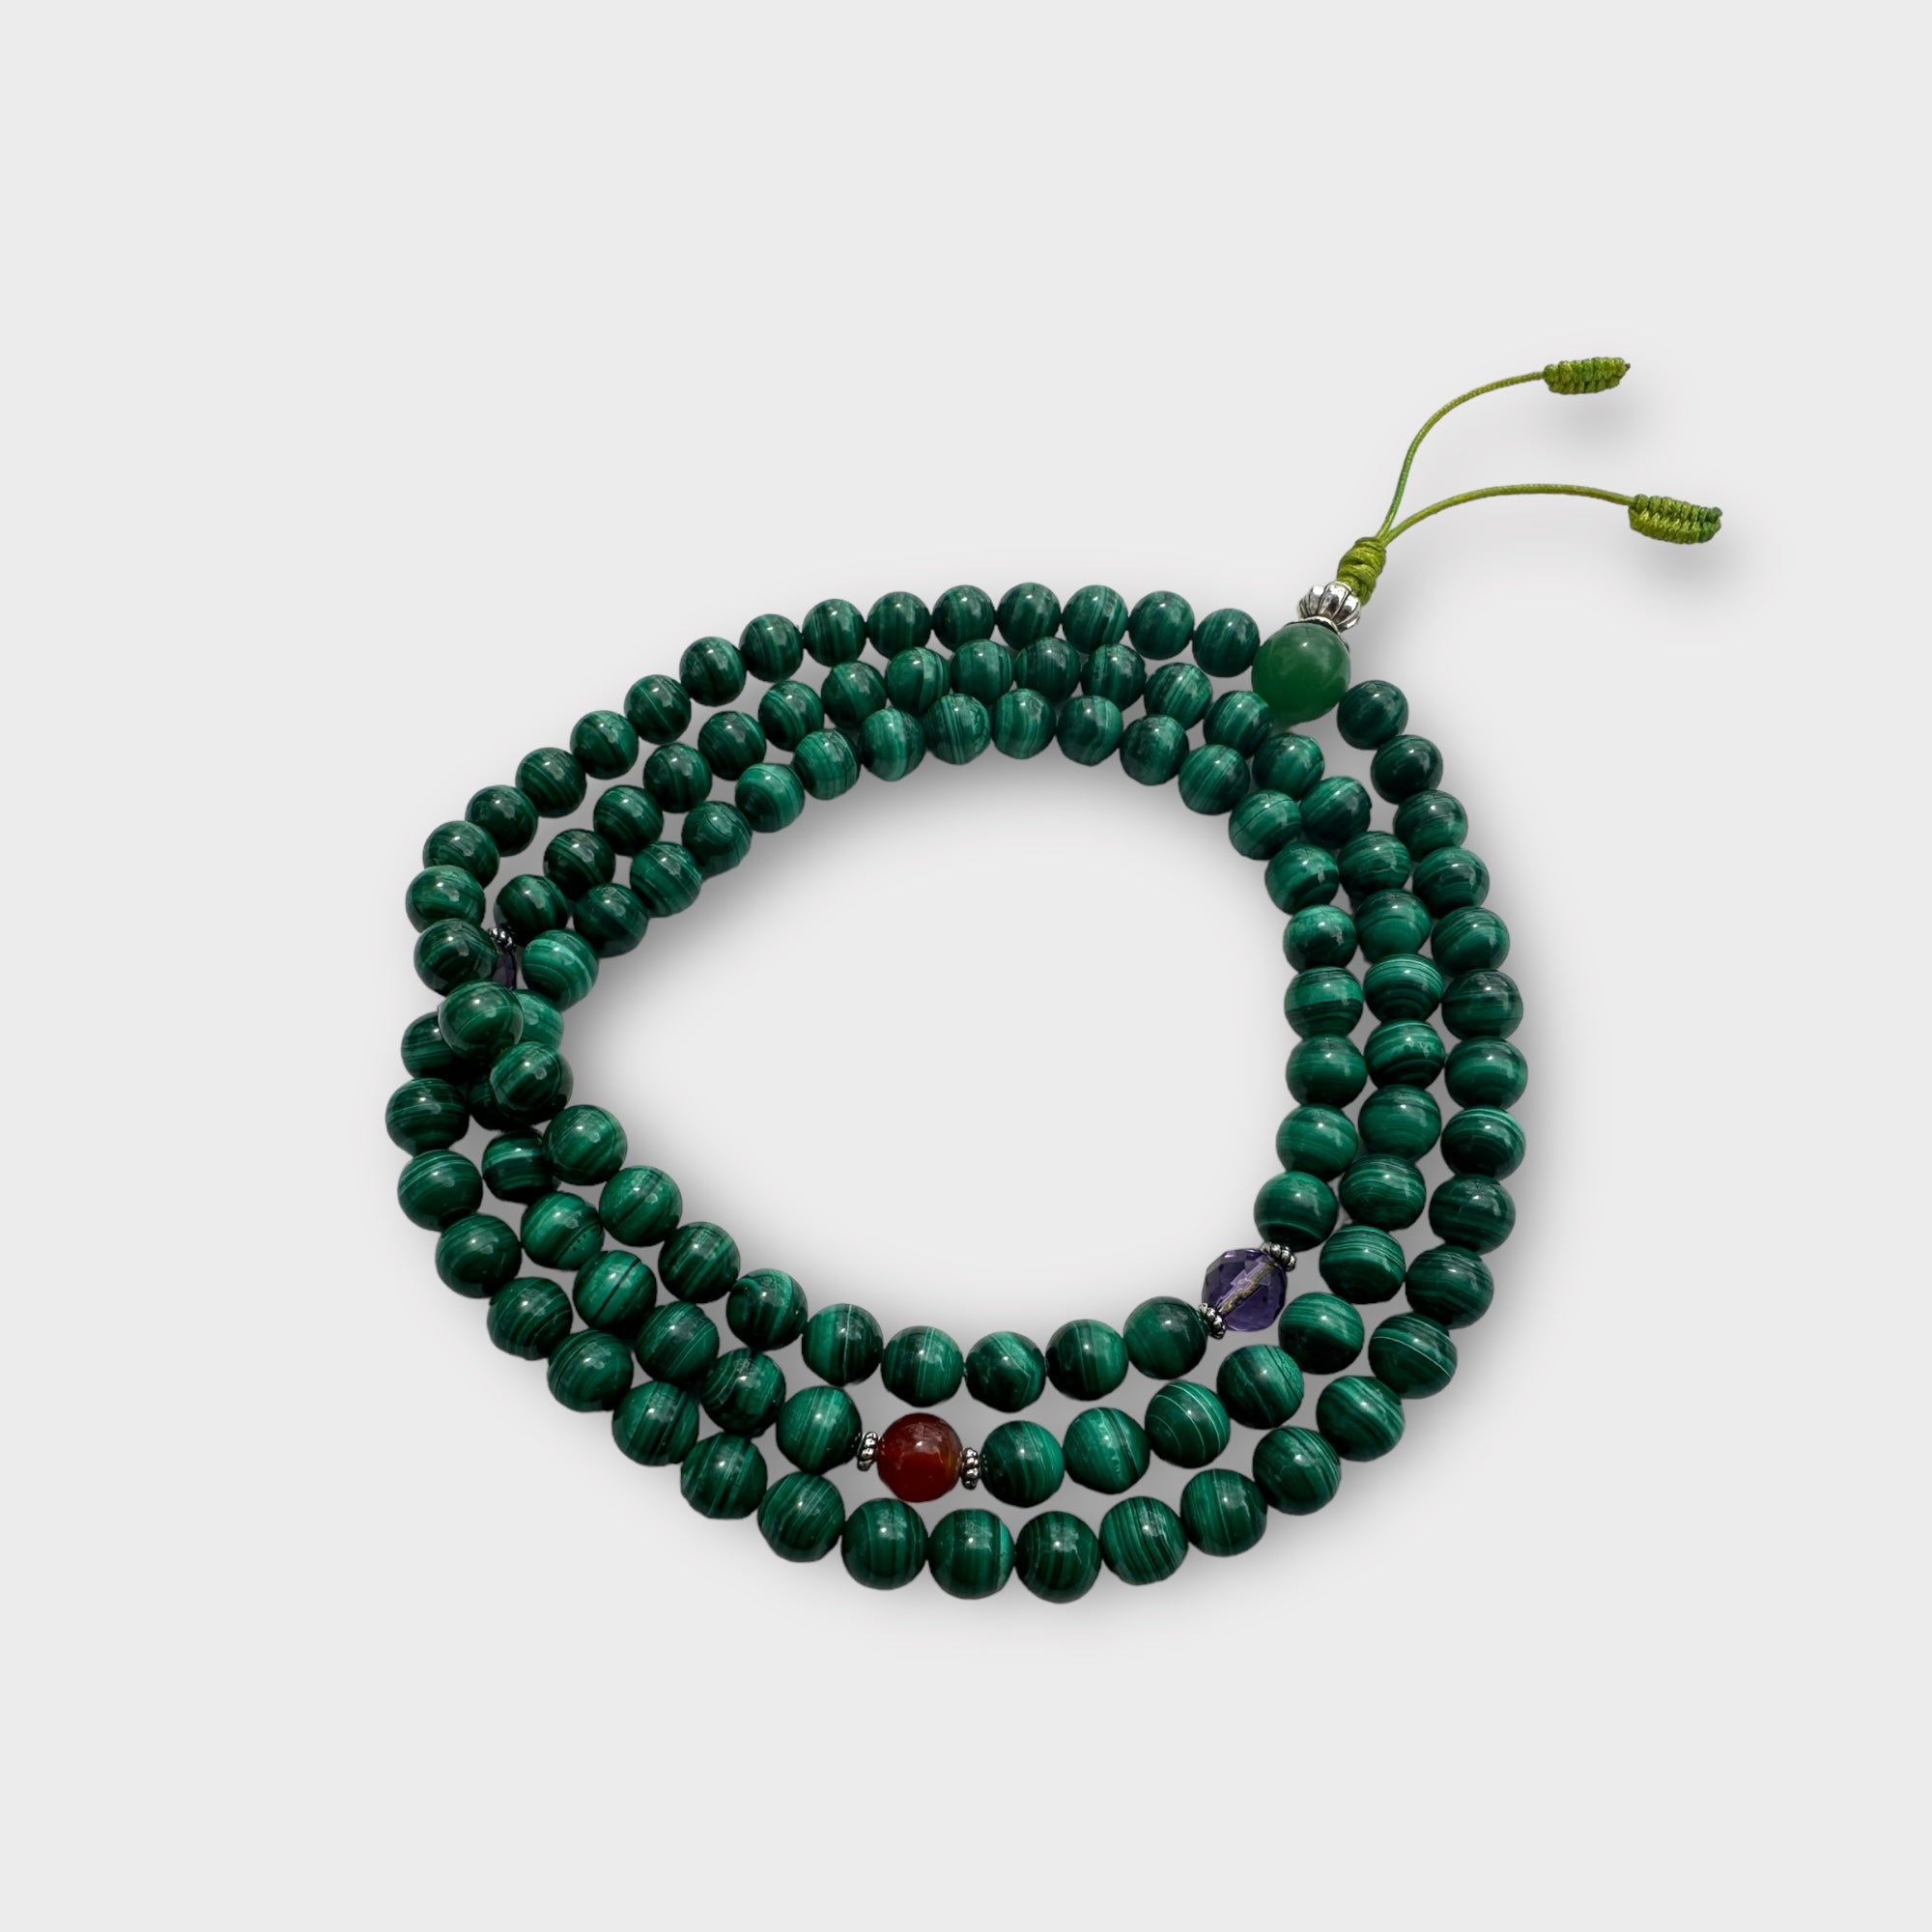 Natural Malachite Mala with Amethyst and Carnelian Spacers